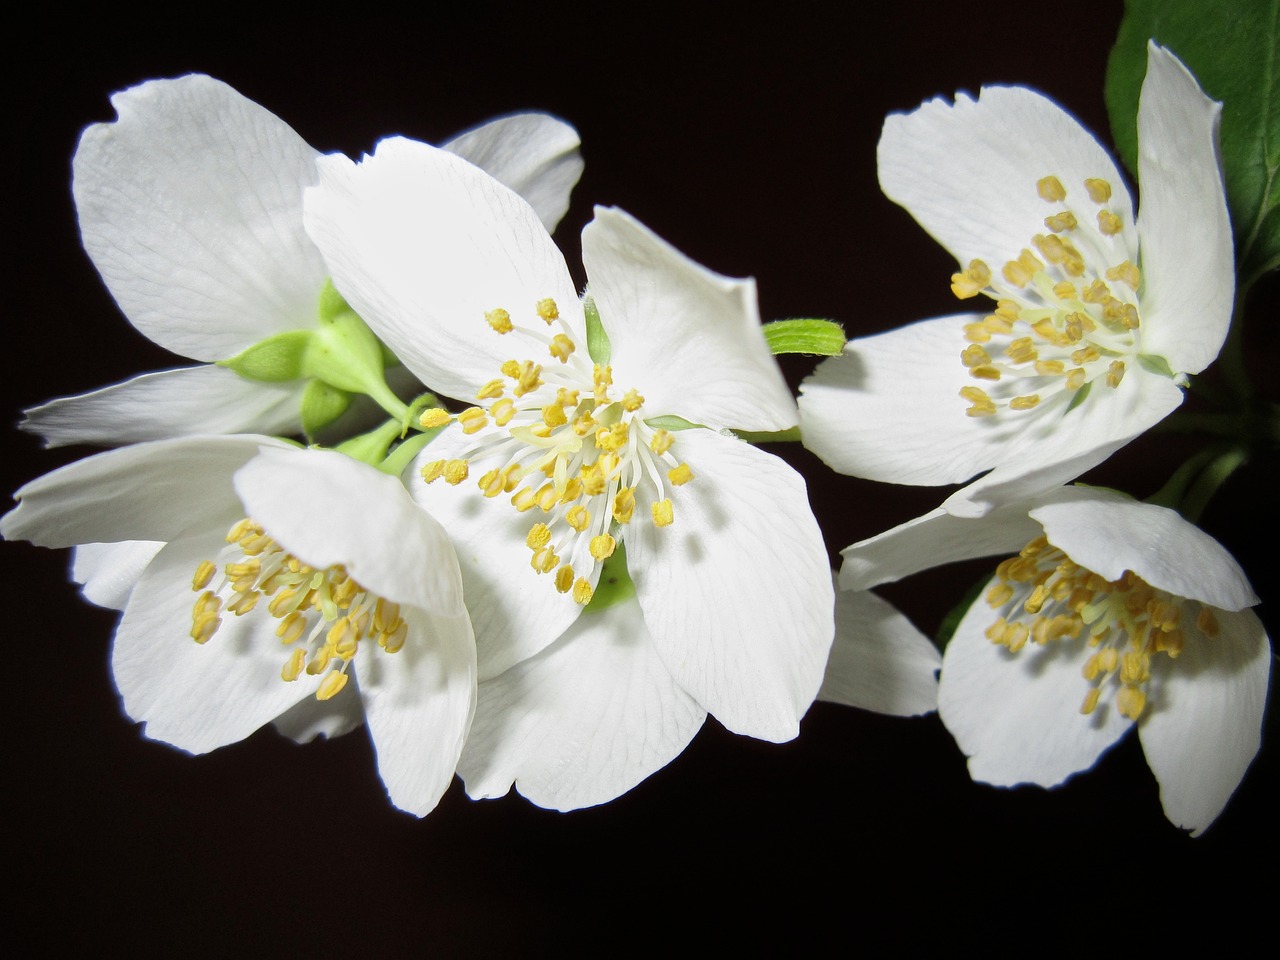 Jasmine Flower Meaning: Heavenly Fragrance and Spiritual Associations